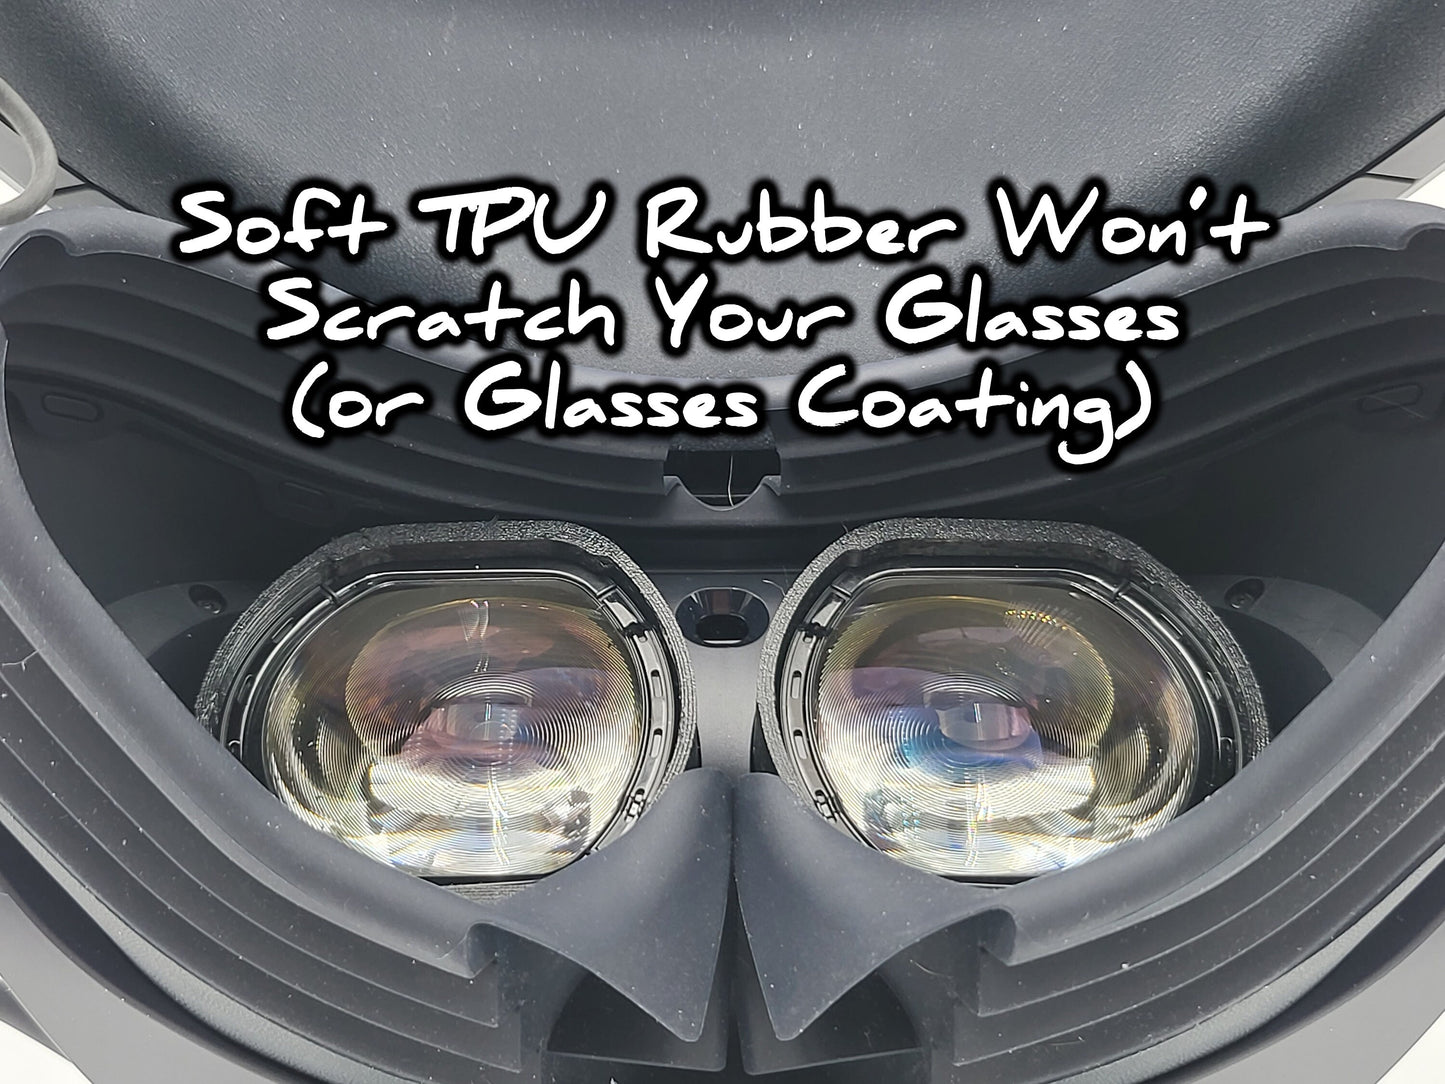 PSVR2 Lens Protectors, Made from TPU Rubber - Won't Scratch Your Glasses or Glasses Coatings!